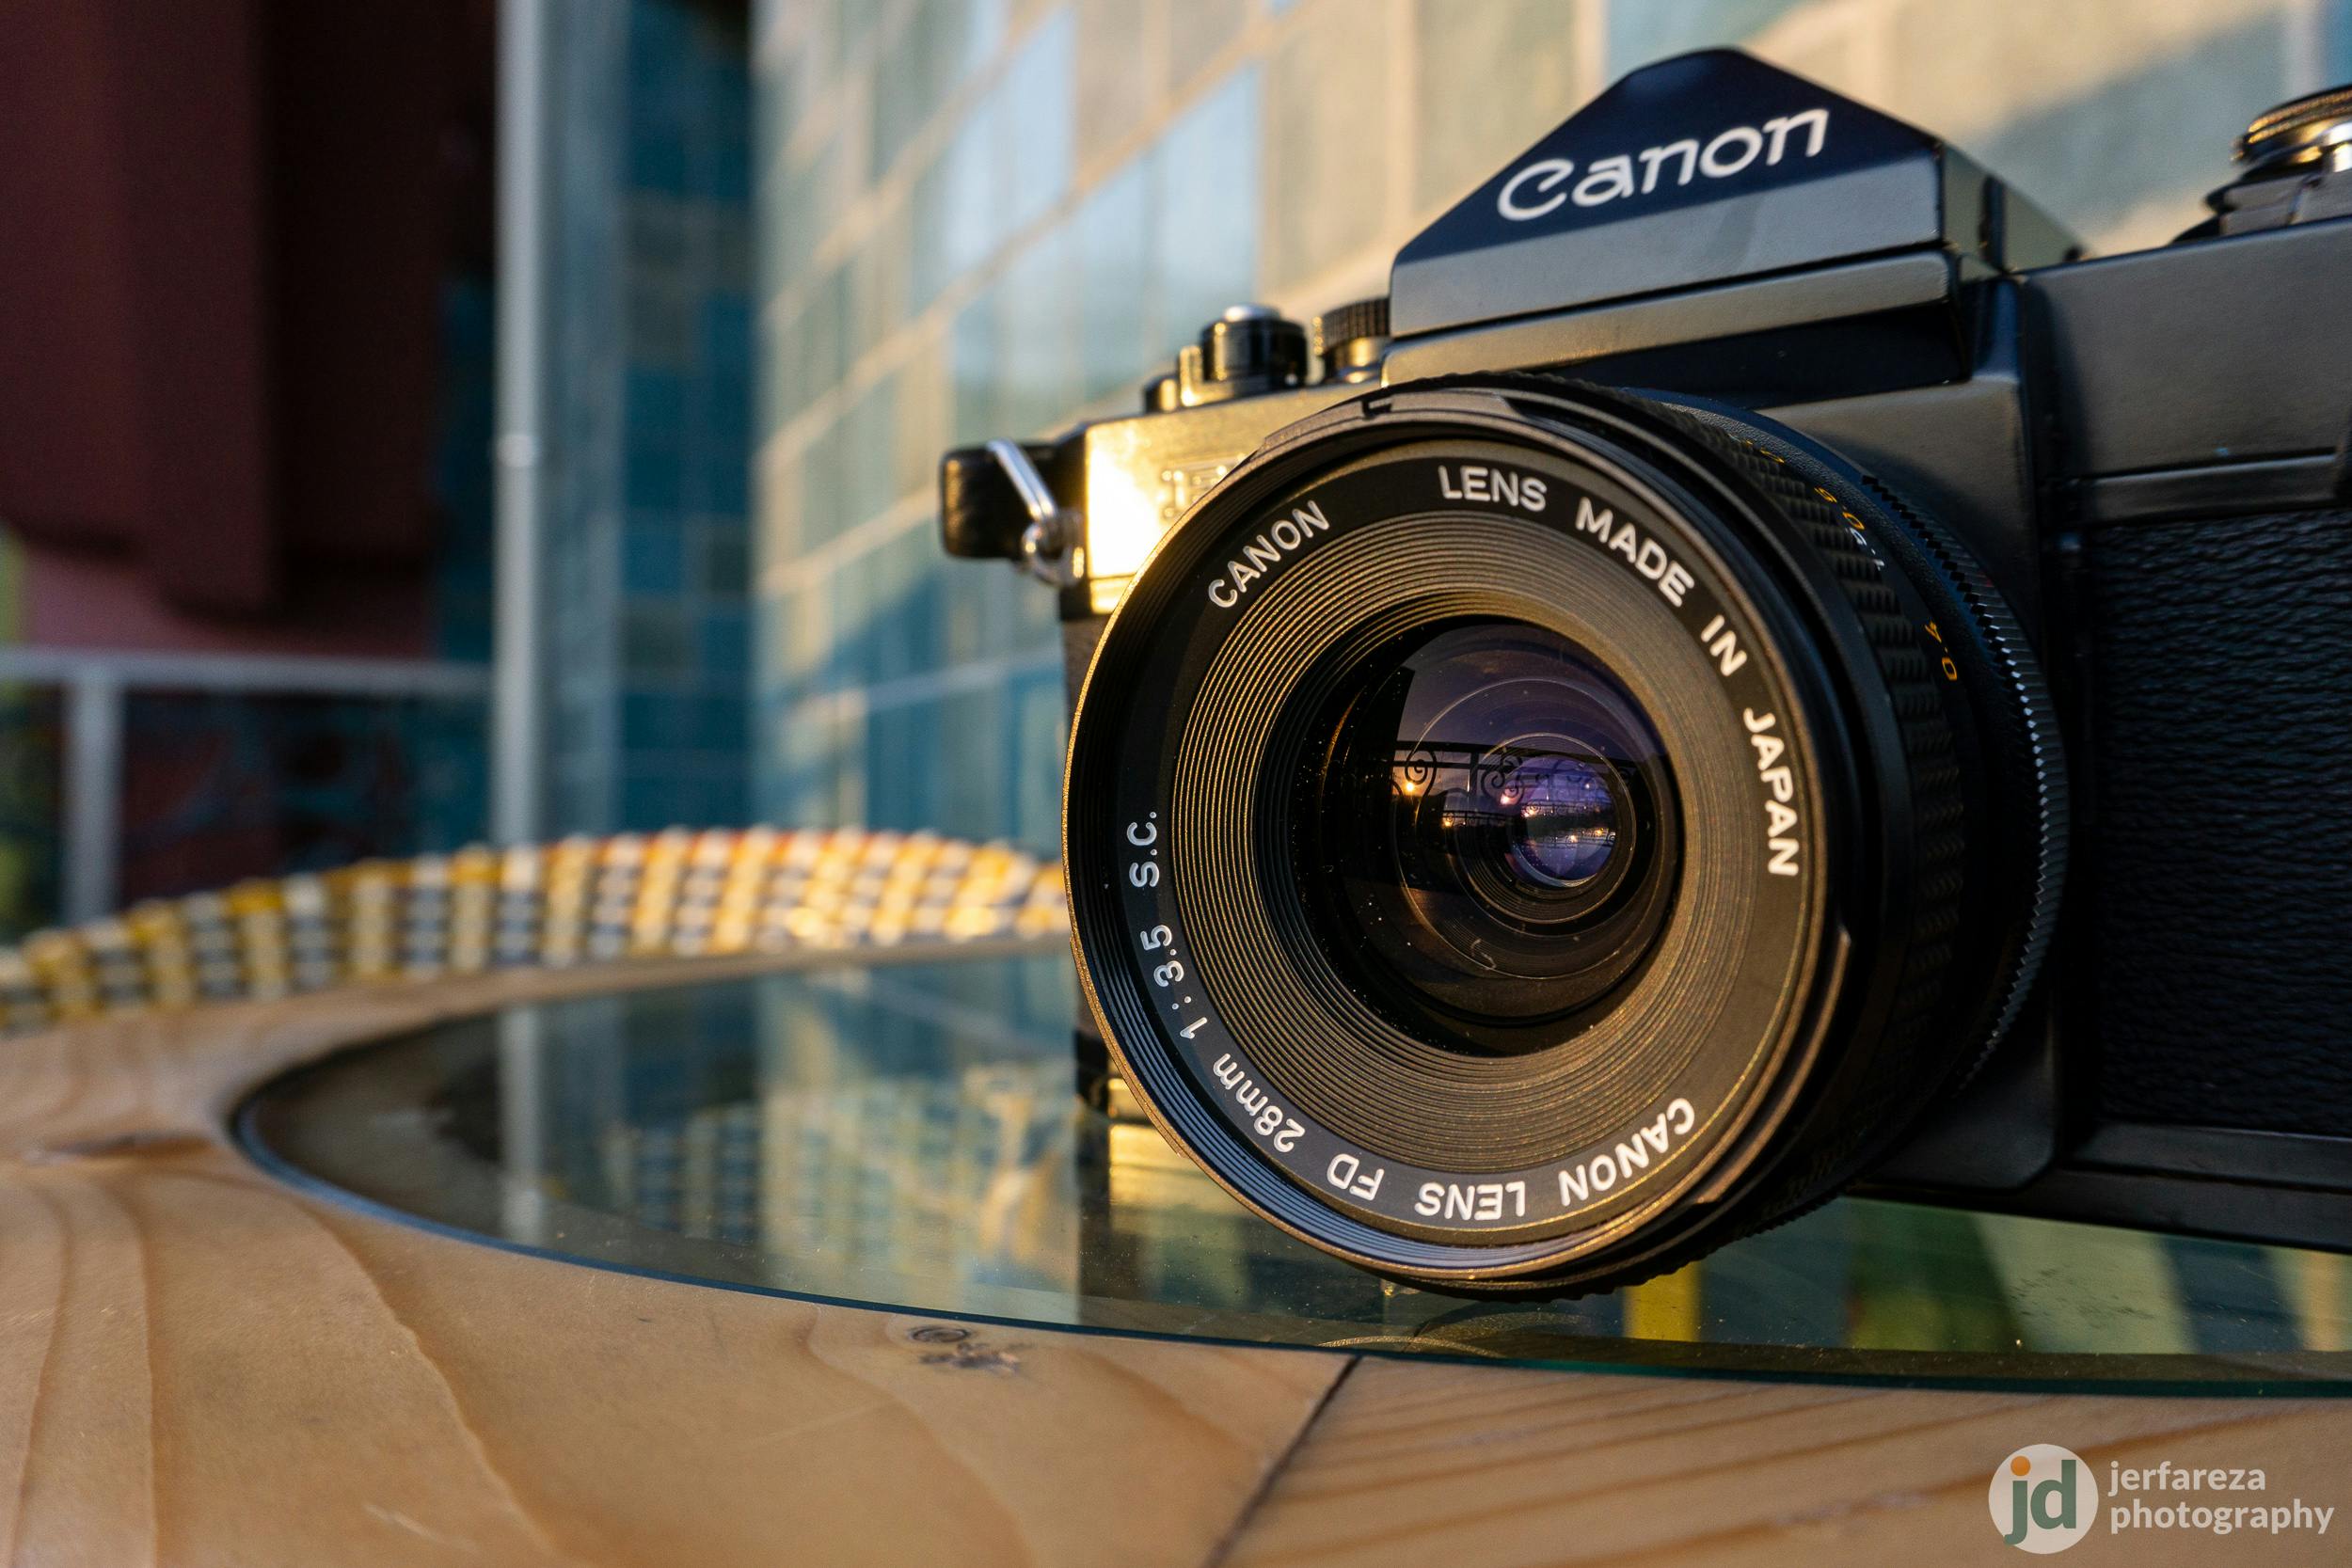 [Lens Review] Canon FD 28mm f3.5 – A Well-built Wide Angle Lens